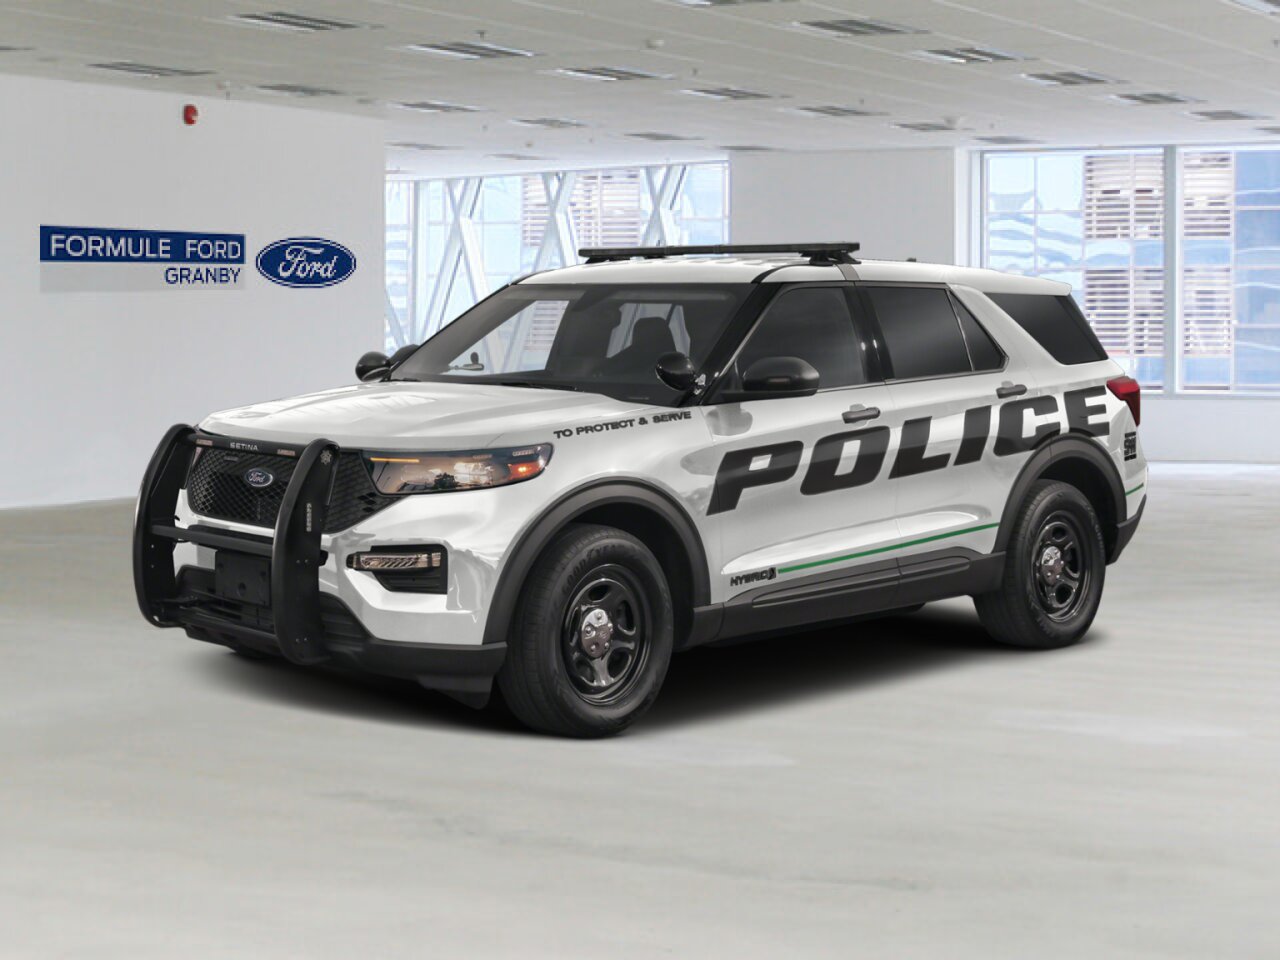 FORD Police Interceptor utilitaire 2023 Granby - photo #0